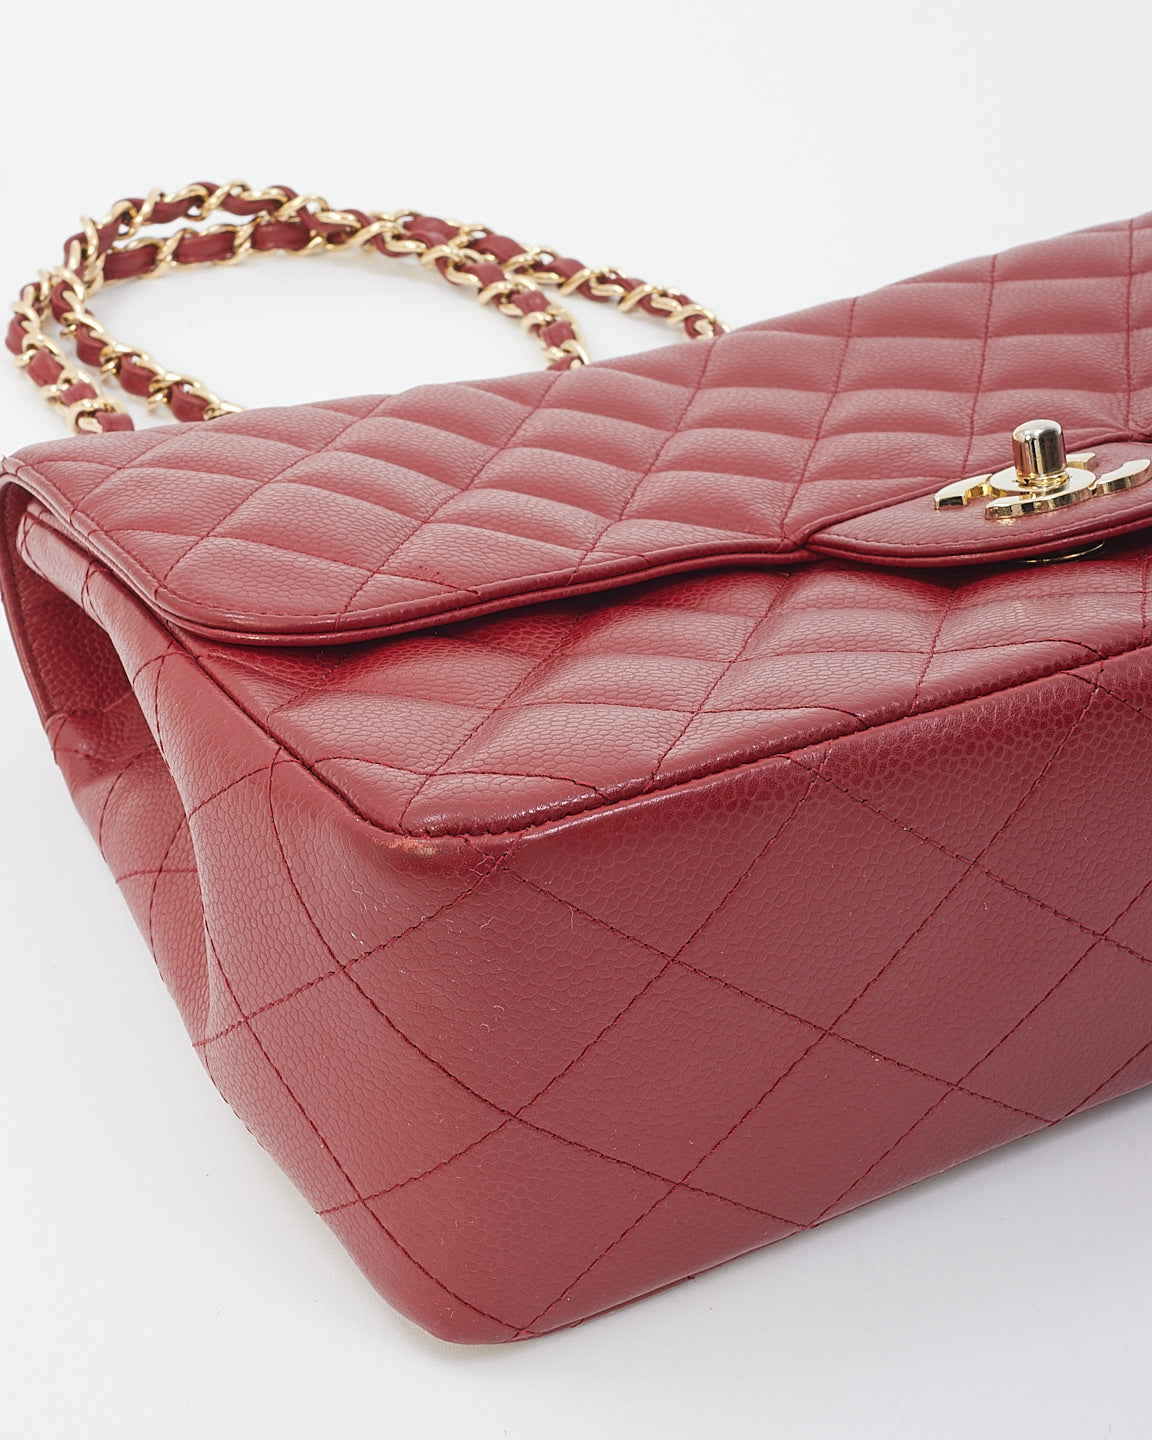 Chanel Burgundy Red Caviar Leather Jumbo Classic Flap with Gold Hardware